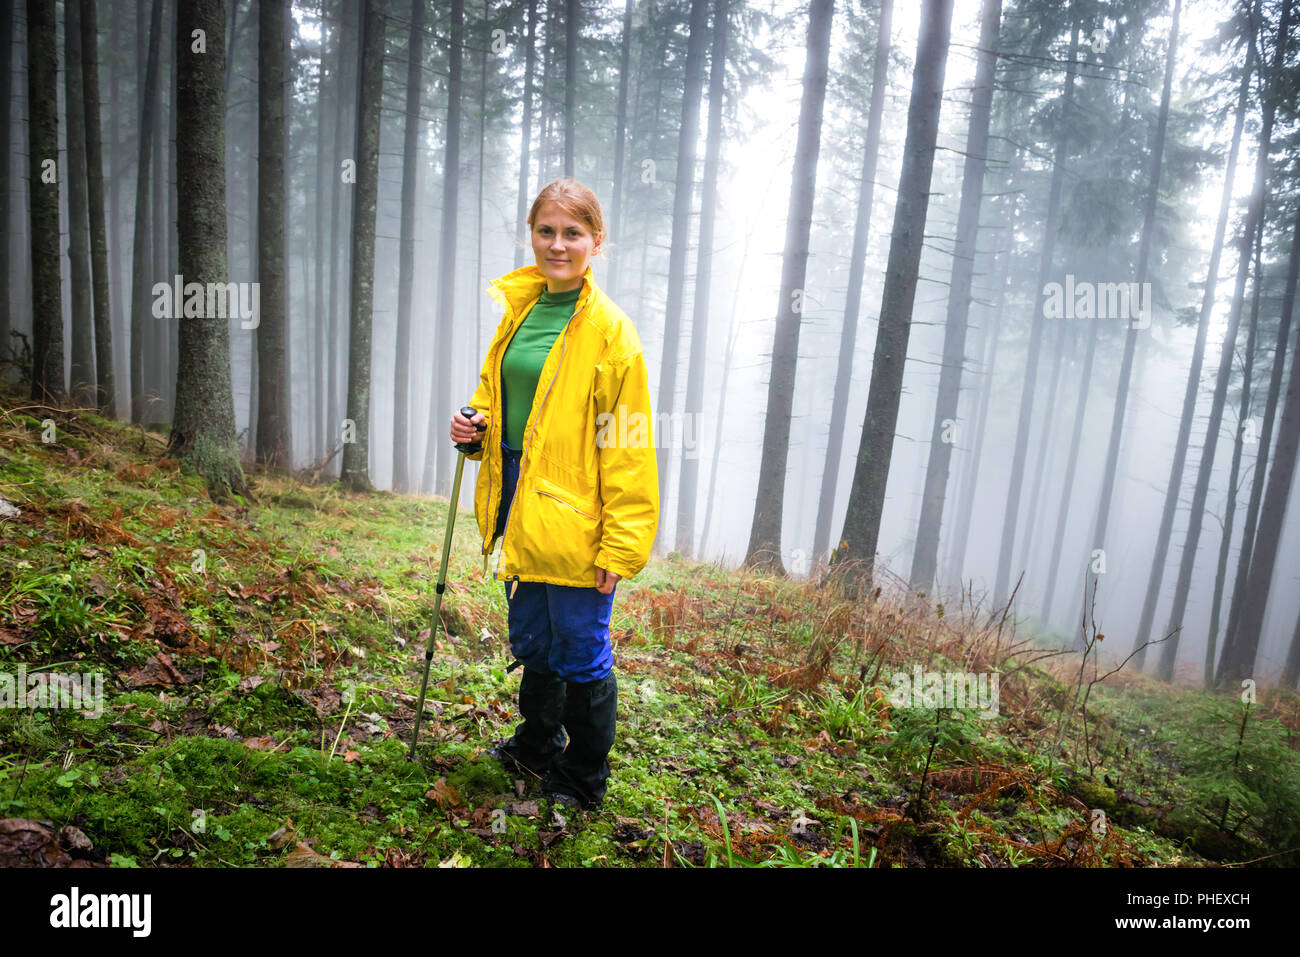 Pretty woman in mistery forest Stock Photo